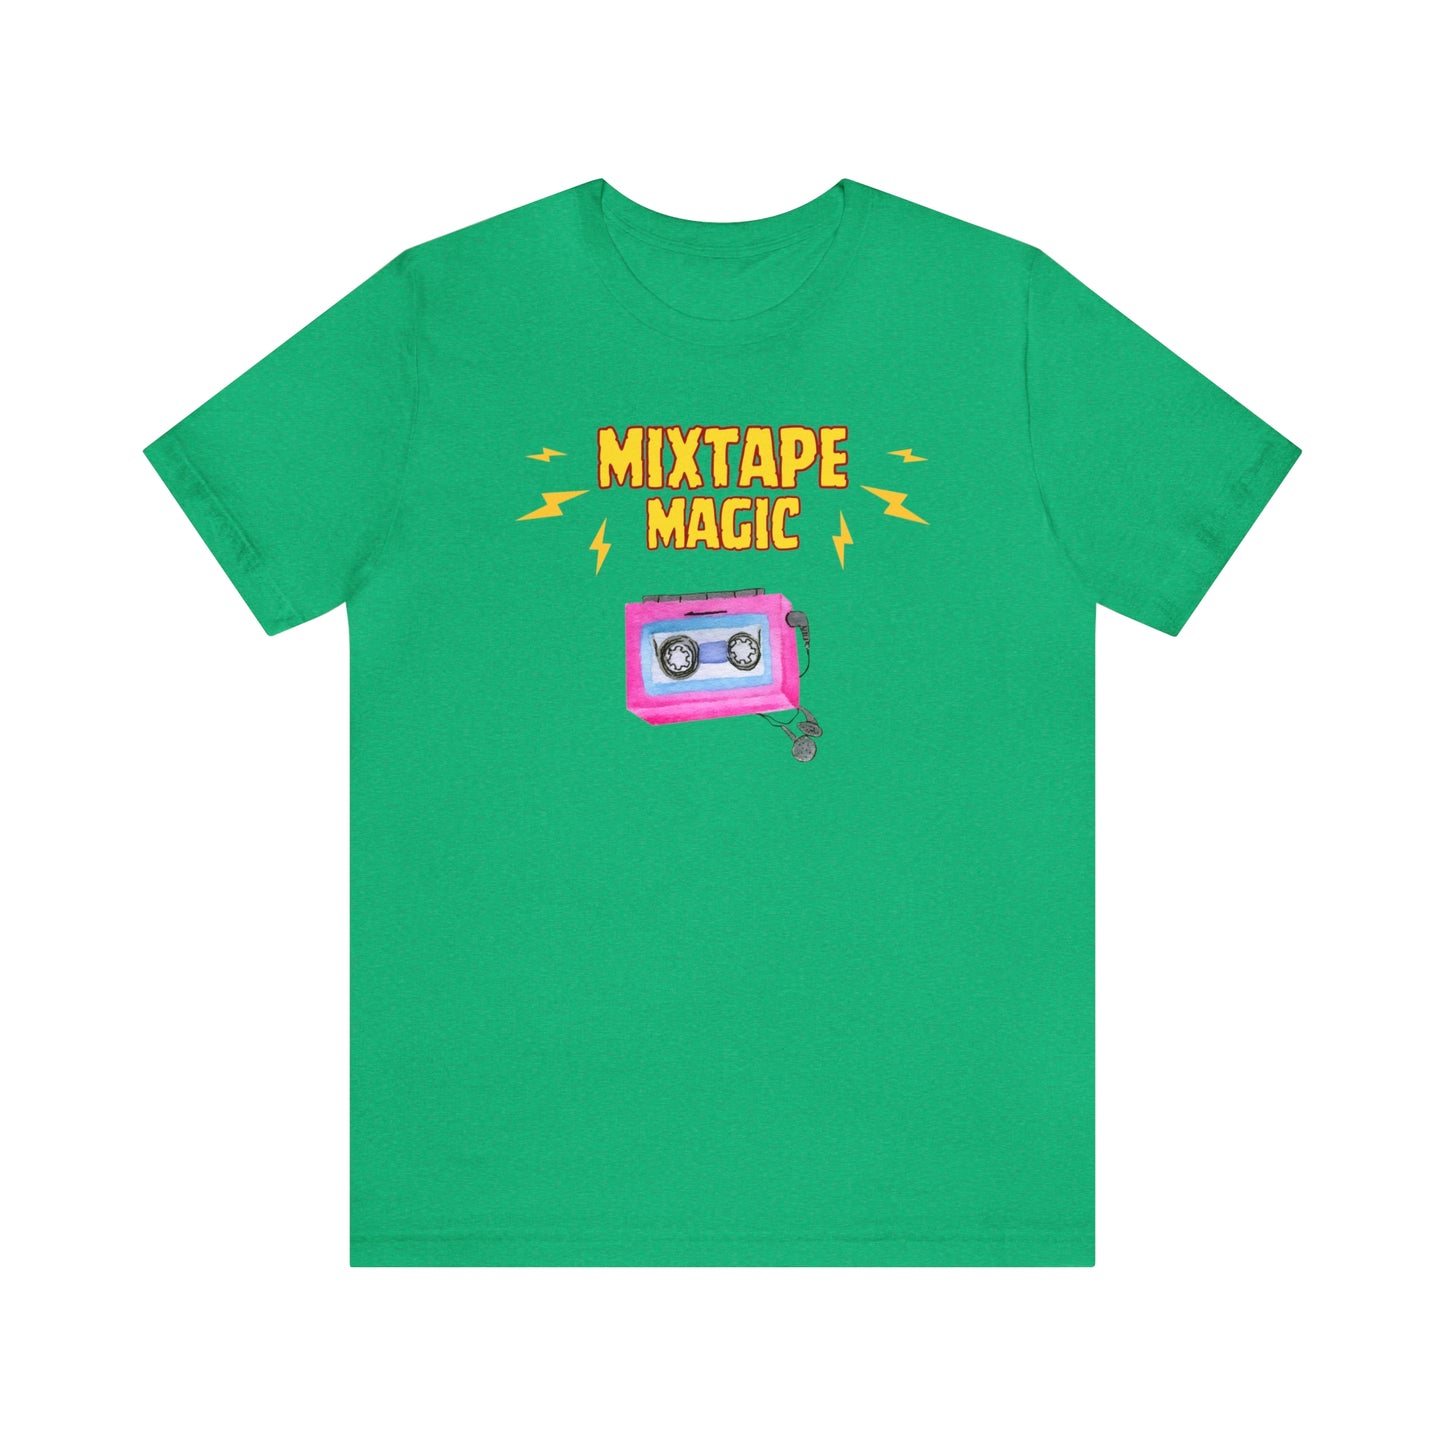 A retro music tshirt with the text "Mixtape magic" and a picture of a cassette player with headphones